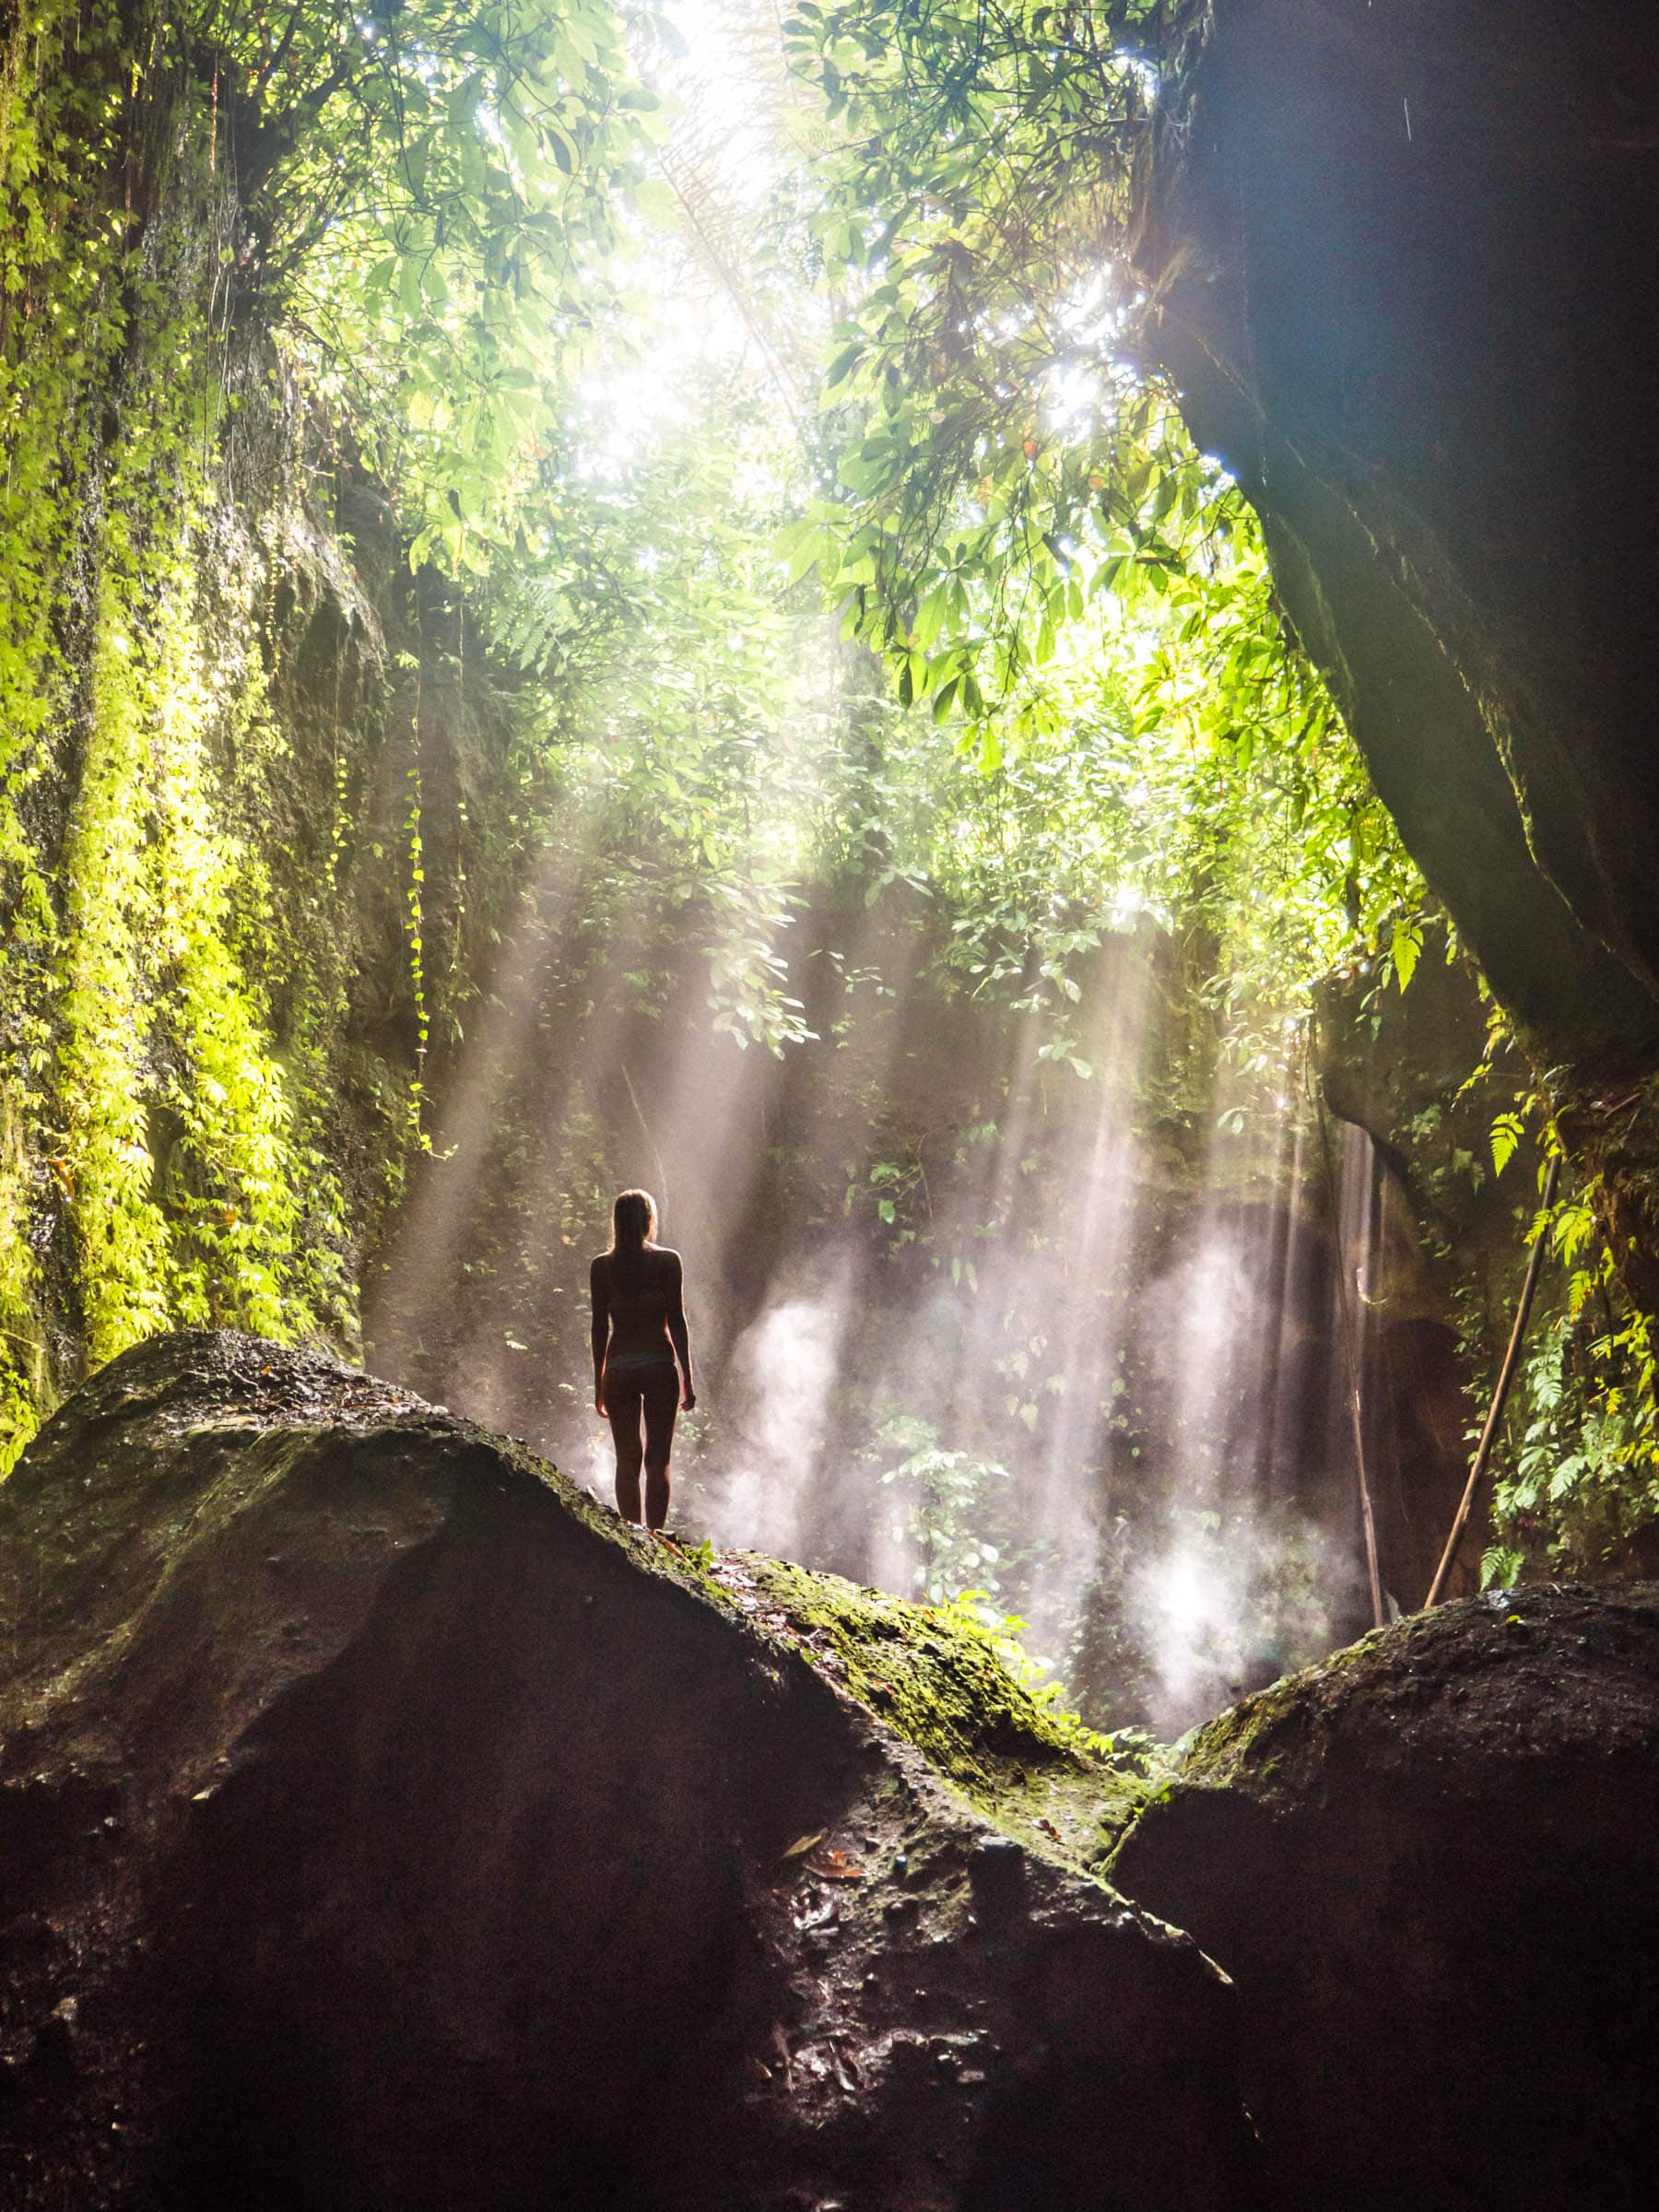 Girl stanidng on a rock in Tukad Cepung Waterfall with sun flares coming through the greenery in Ubud Bali